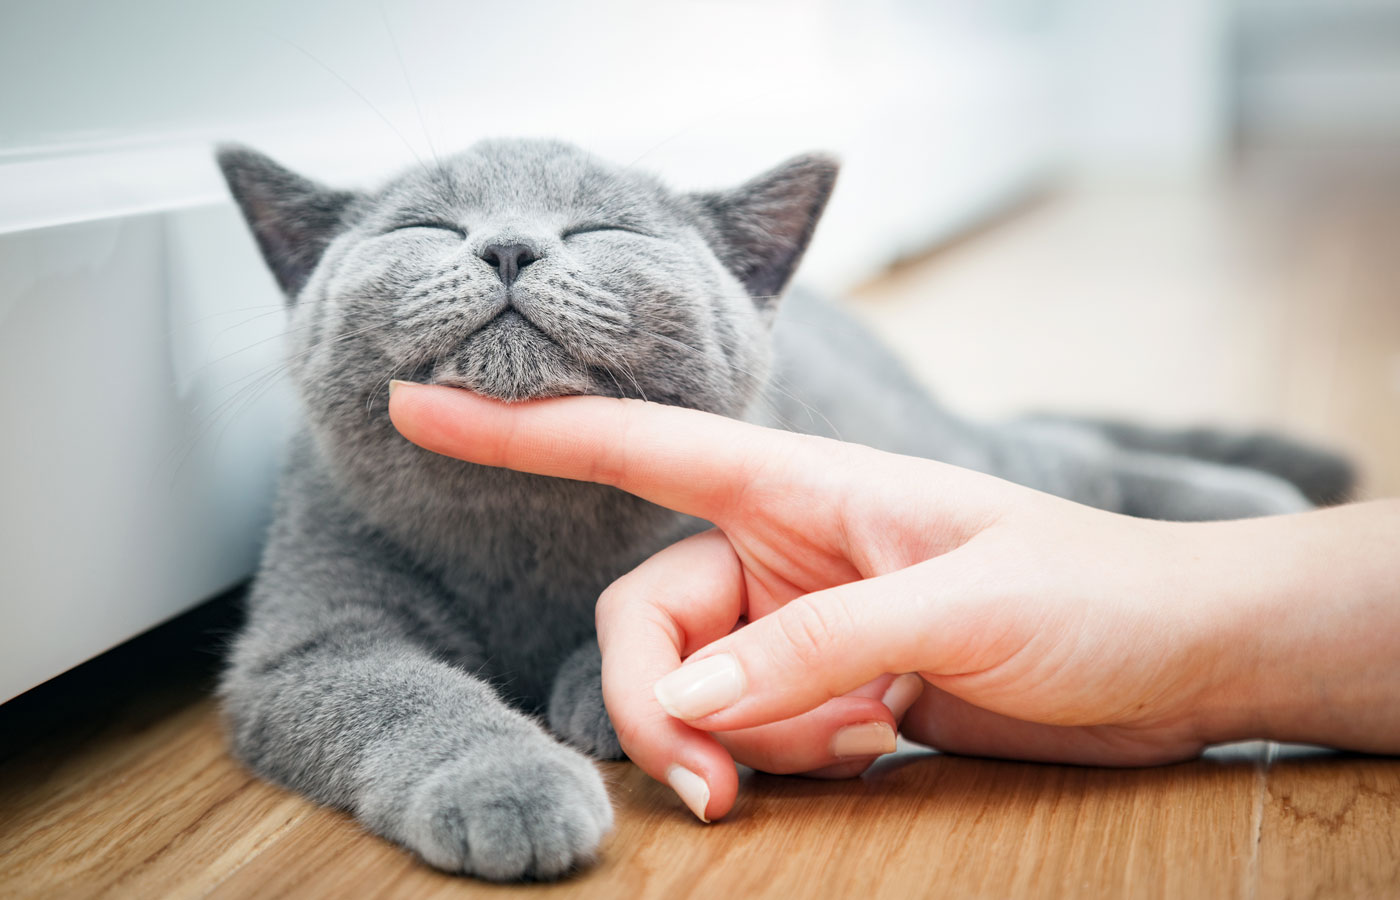 Happy kitten likes being stroked by woman's hand.